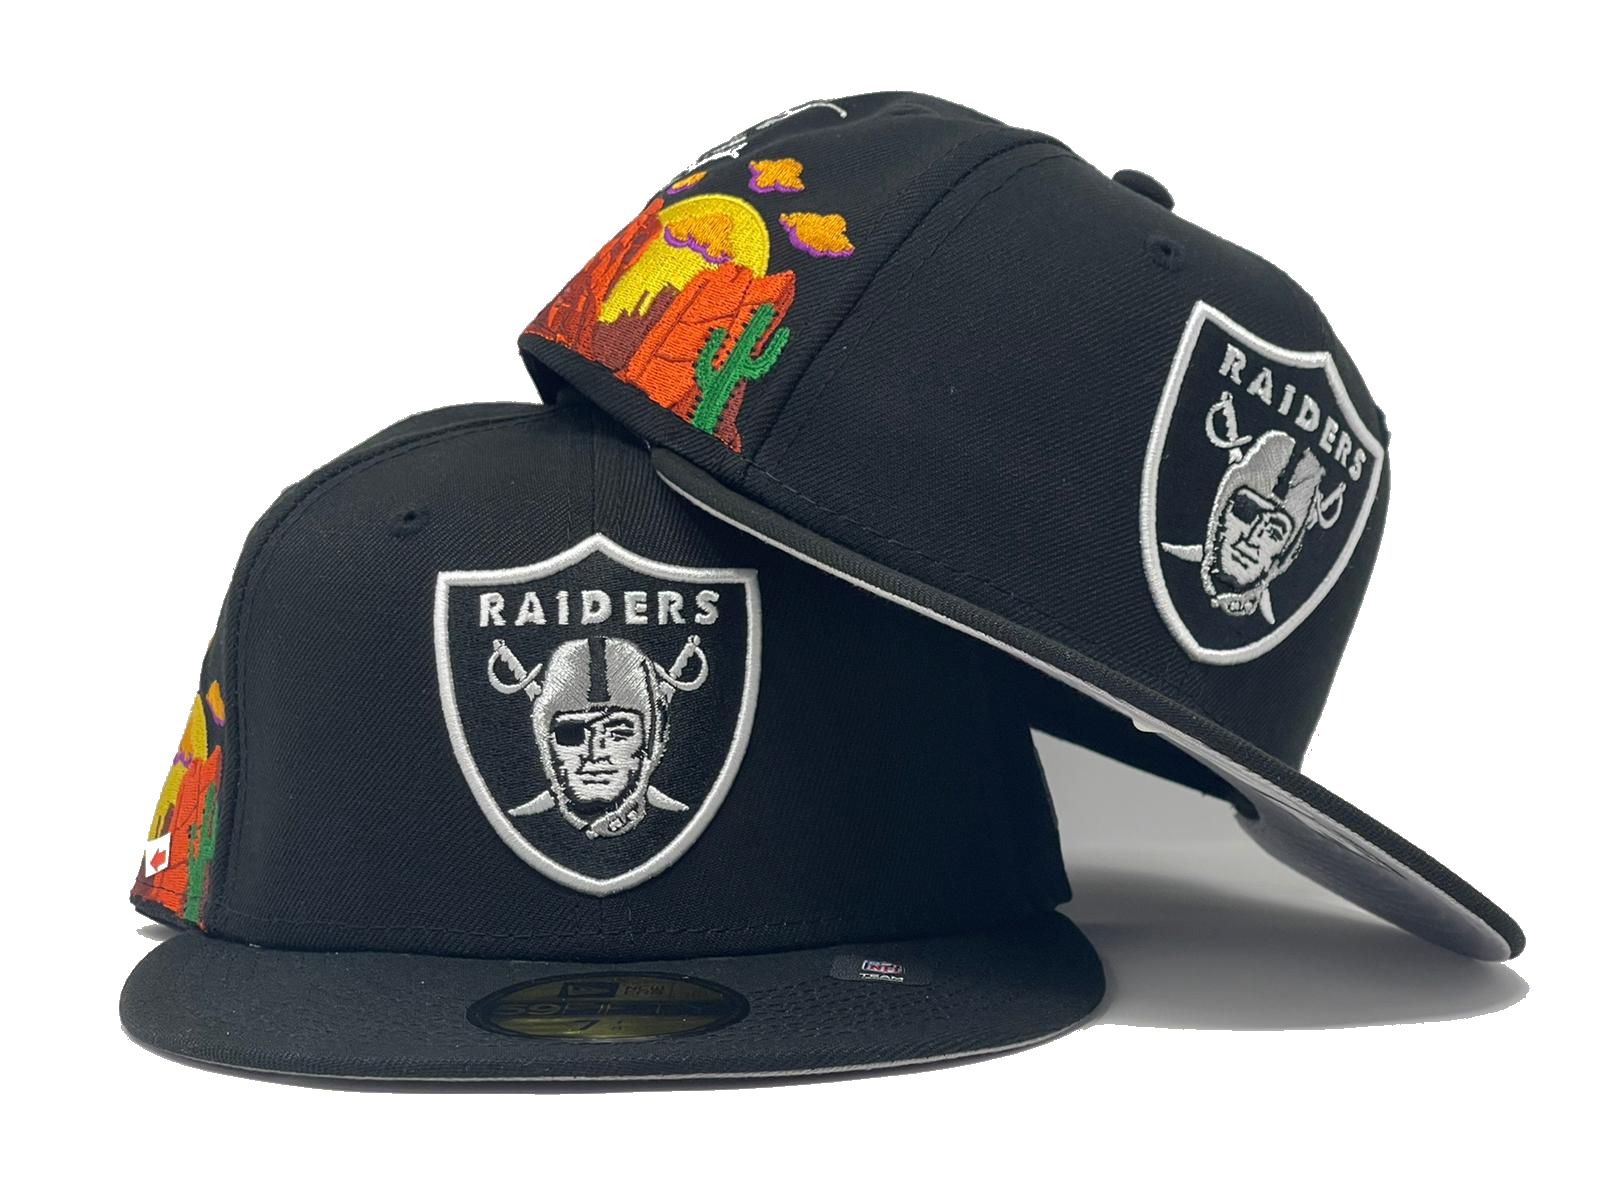 raiders fitted hats